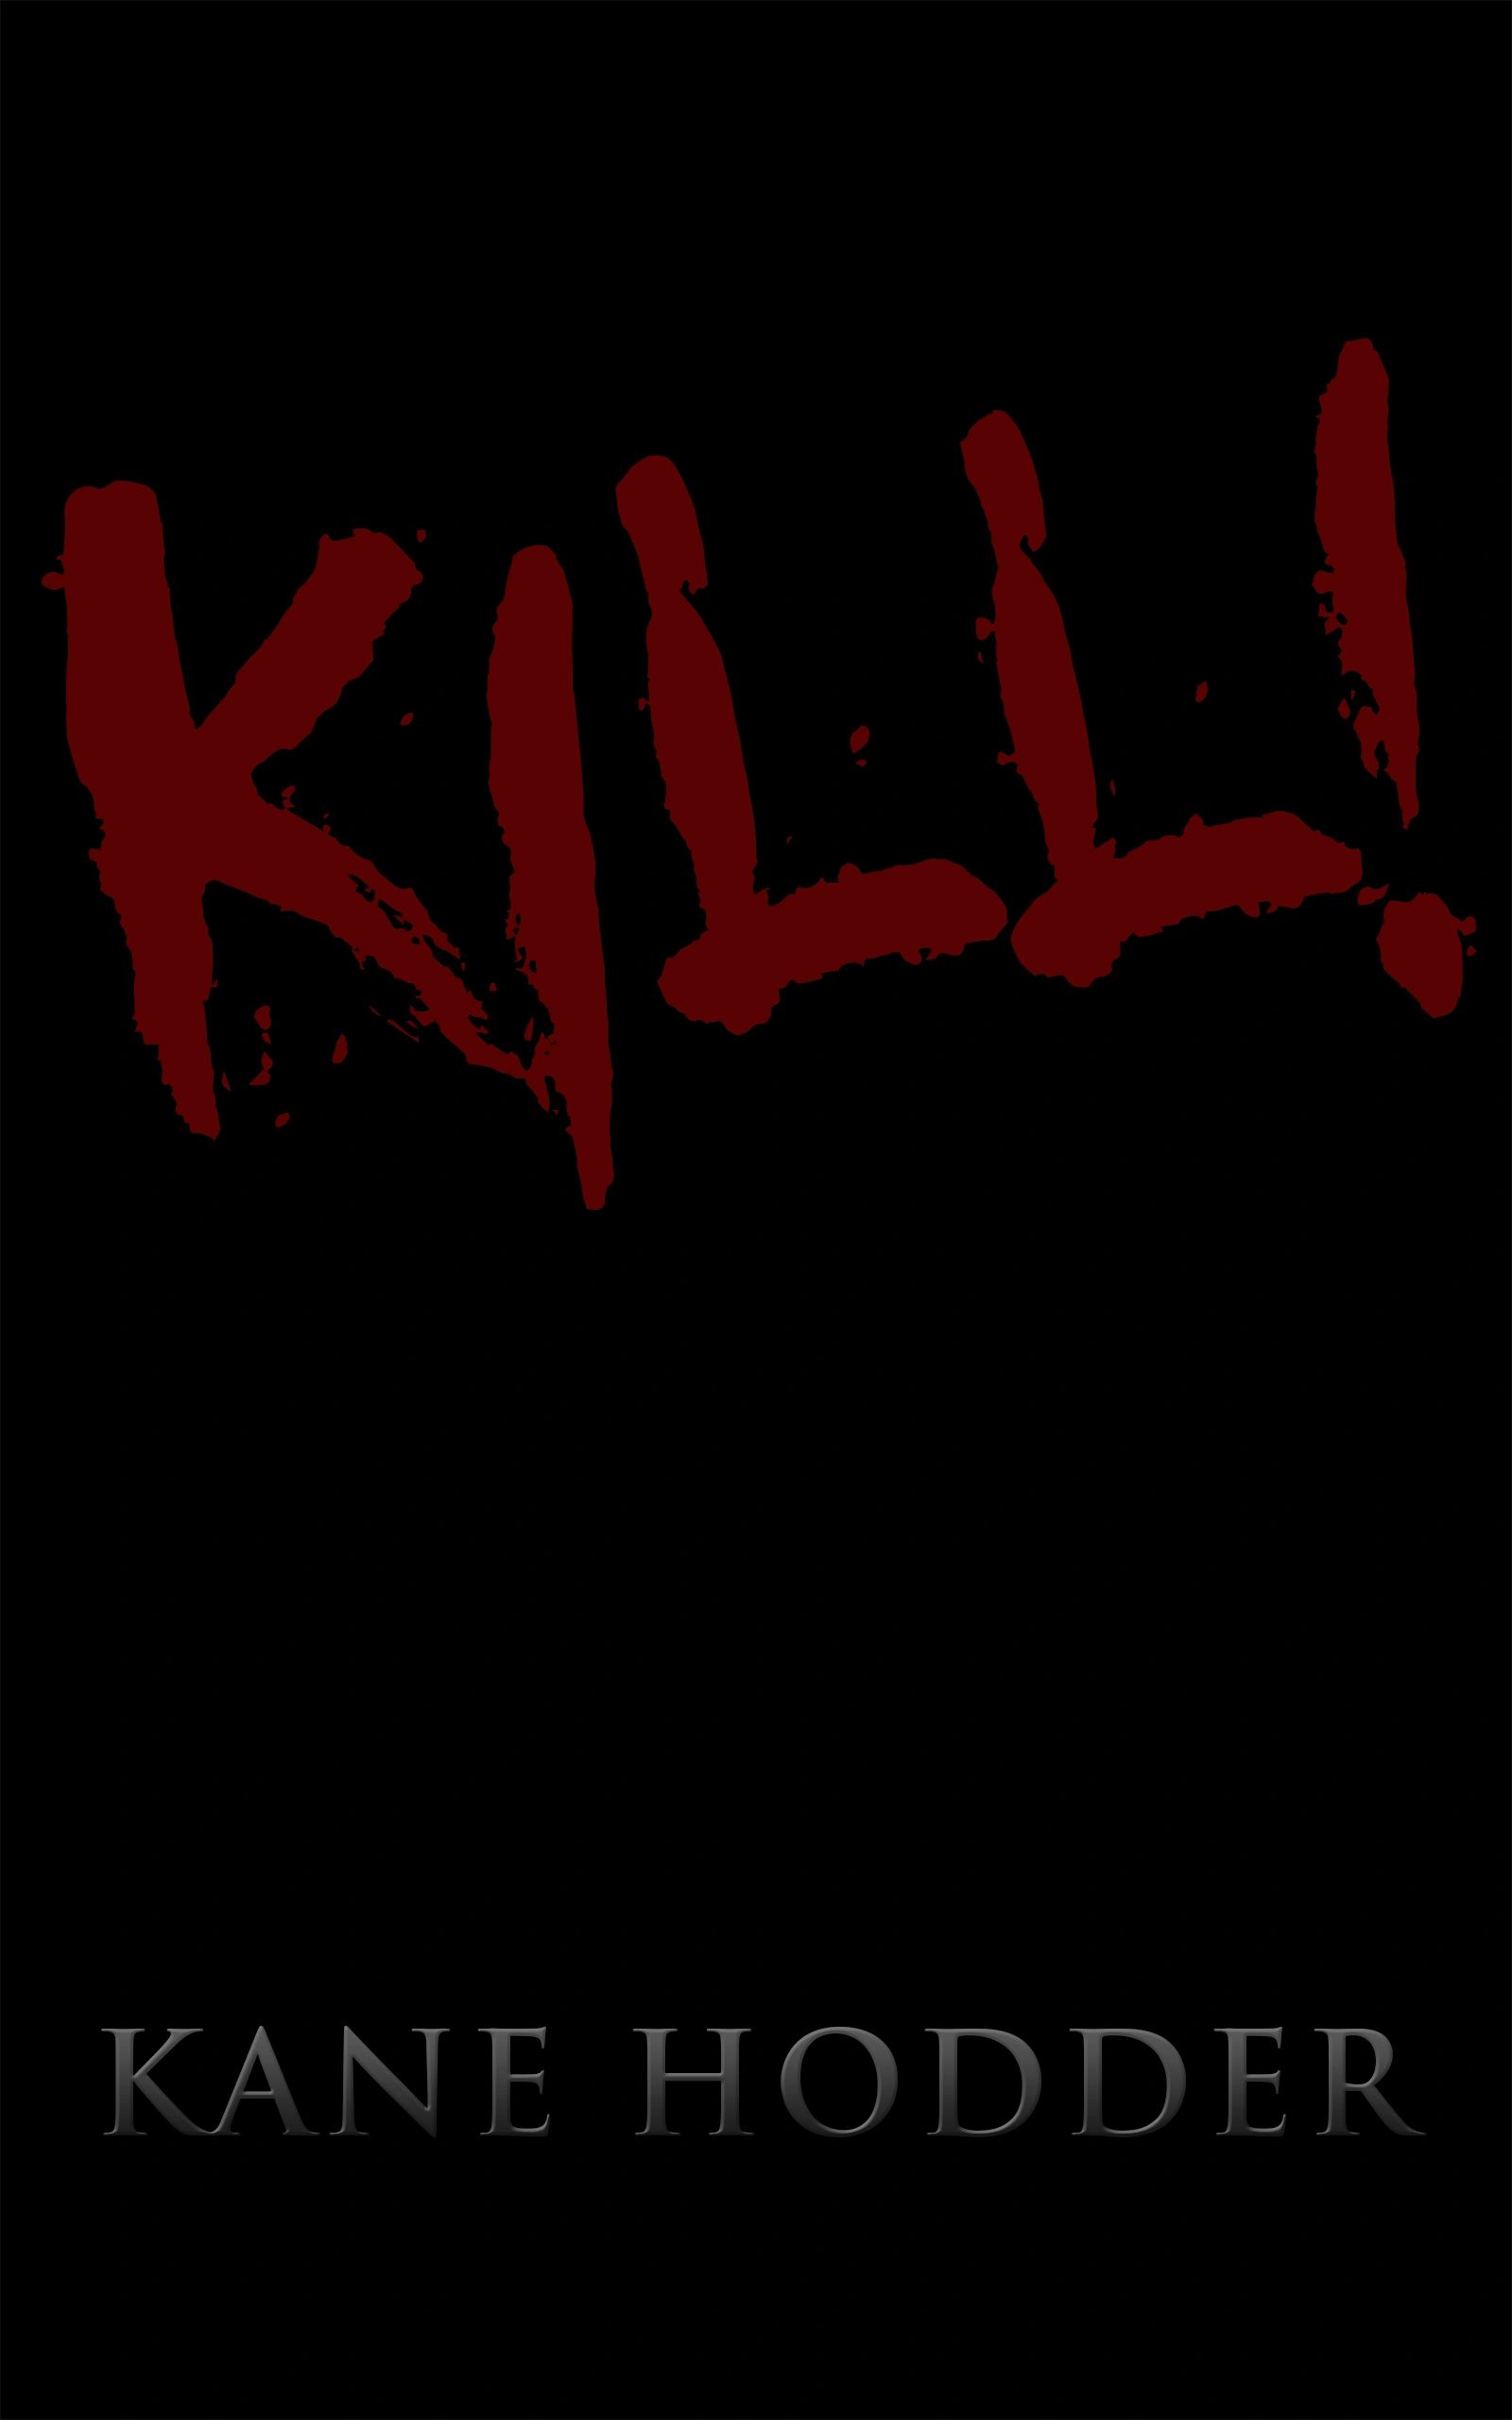 The cover of kill.  The red will be foil stamped on the cover!